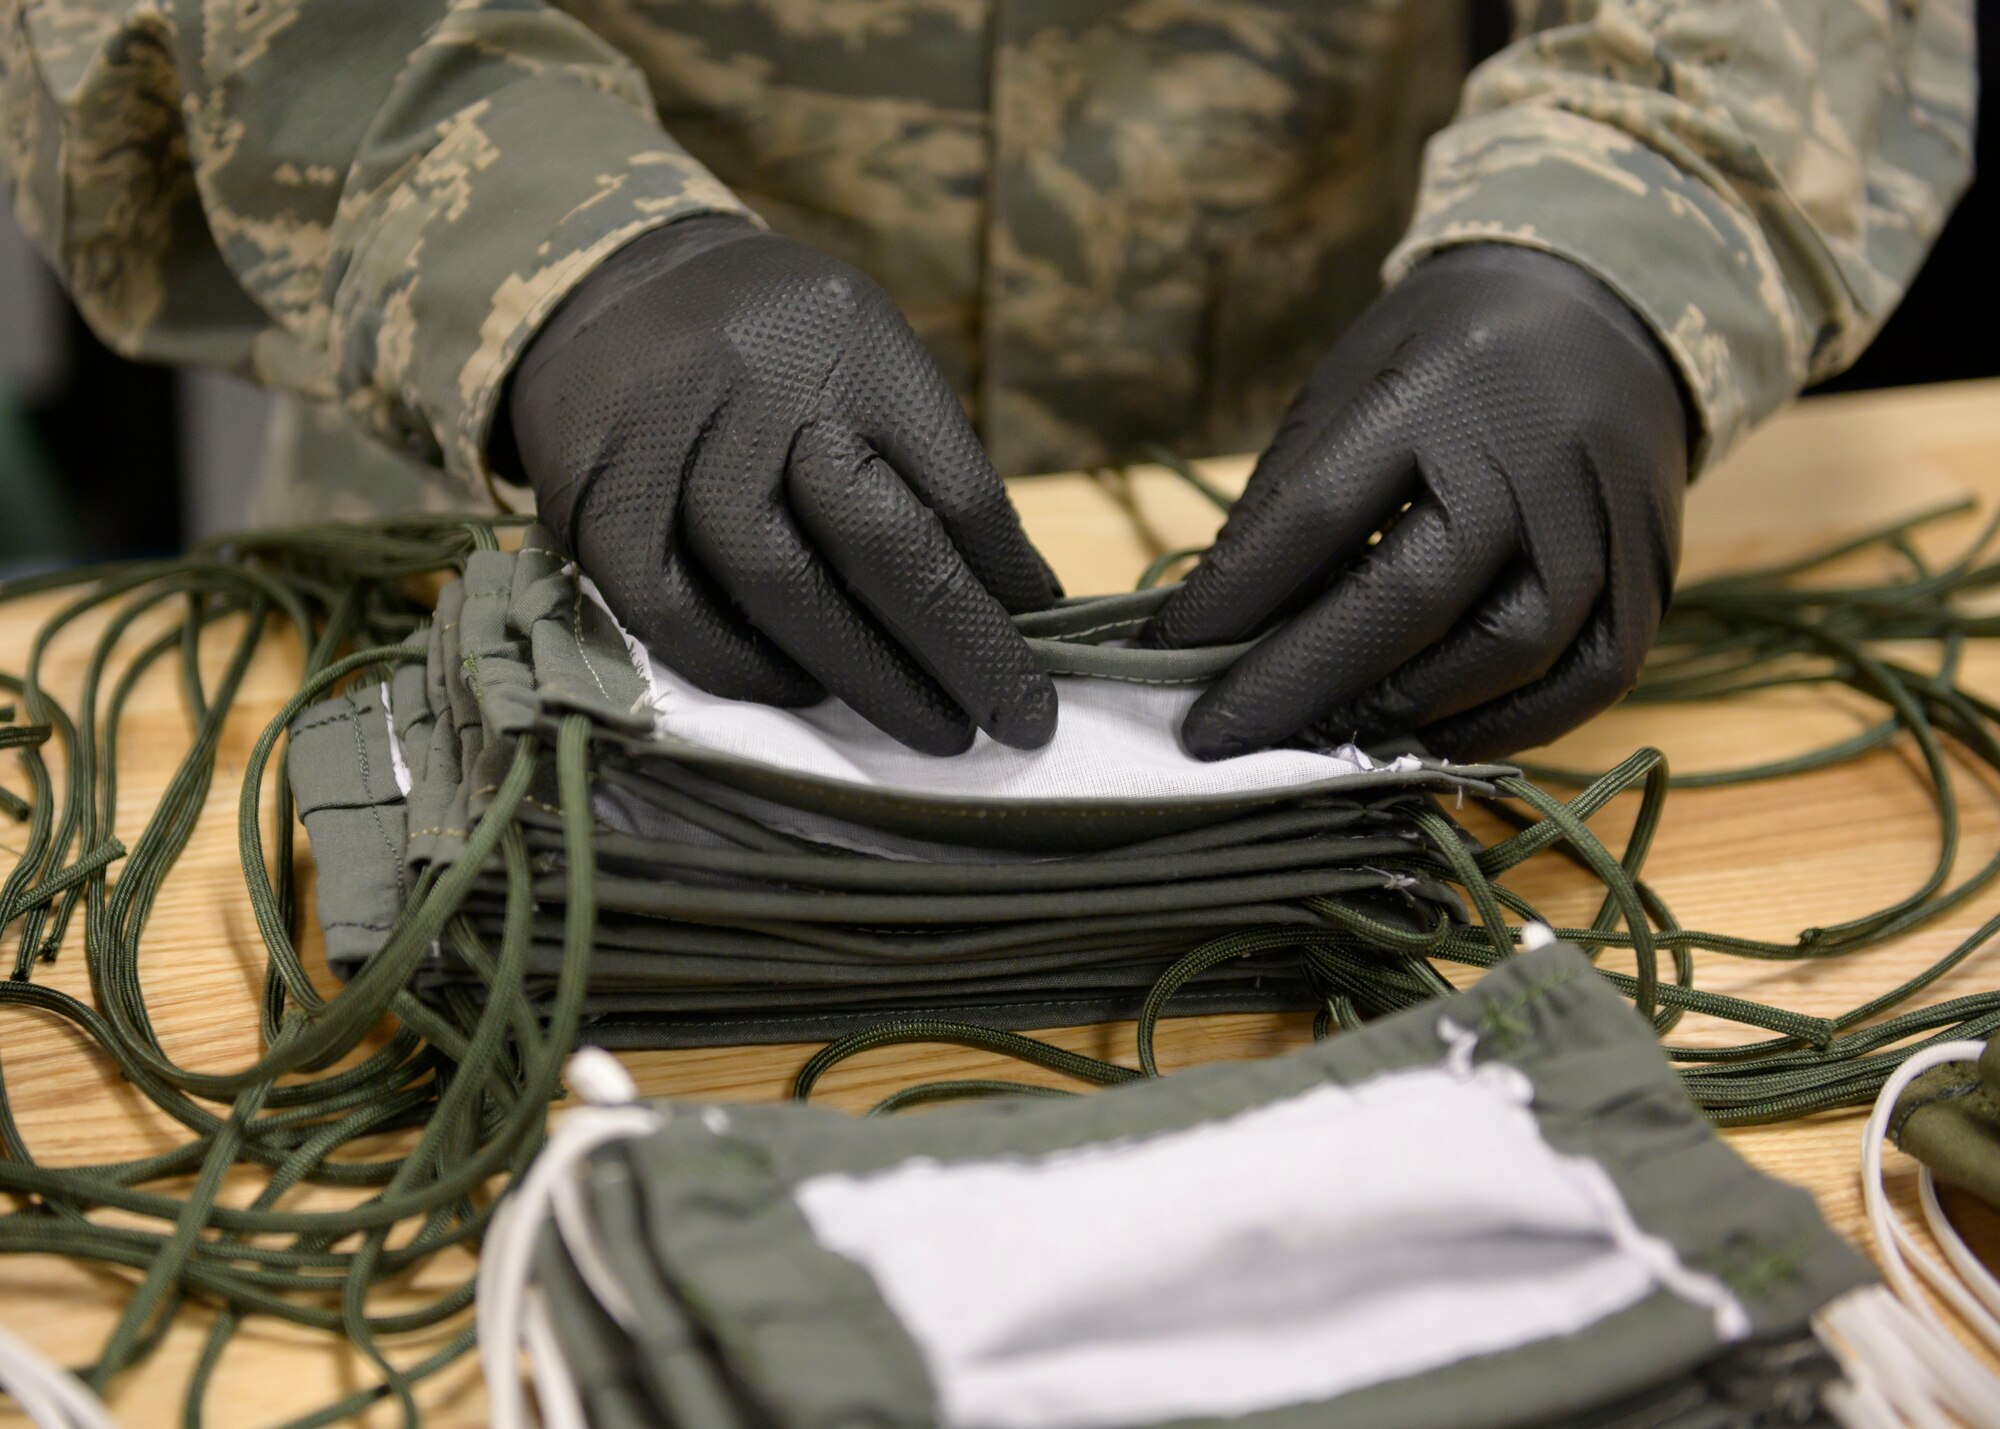 Airmen from the 366th Operations Support Squadron, craft masks for personnel on base, March 20, 2020, at Mountain Home Air Force Base, Idaho. These masks are designed in a multi-layer style to further deter the spread of CVOID-19. (U.S. Air Force photo by Senior Airman Tyrell Hall)